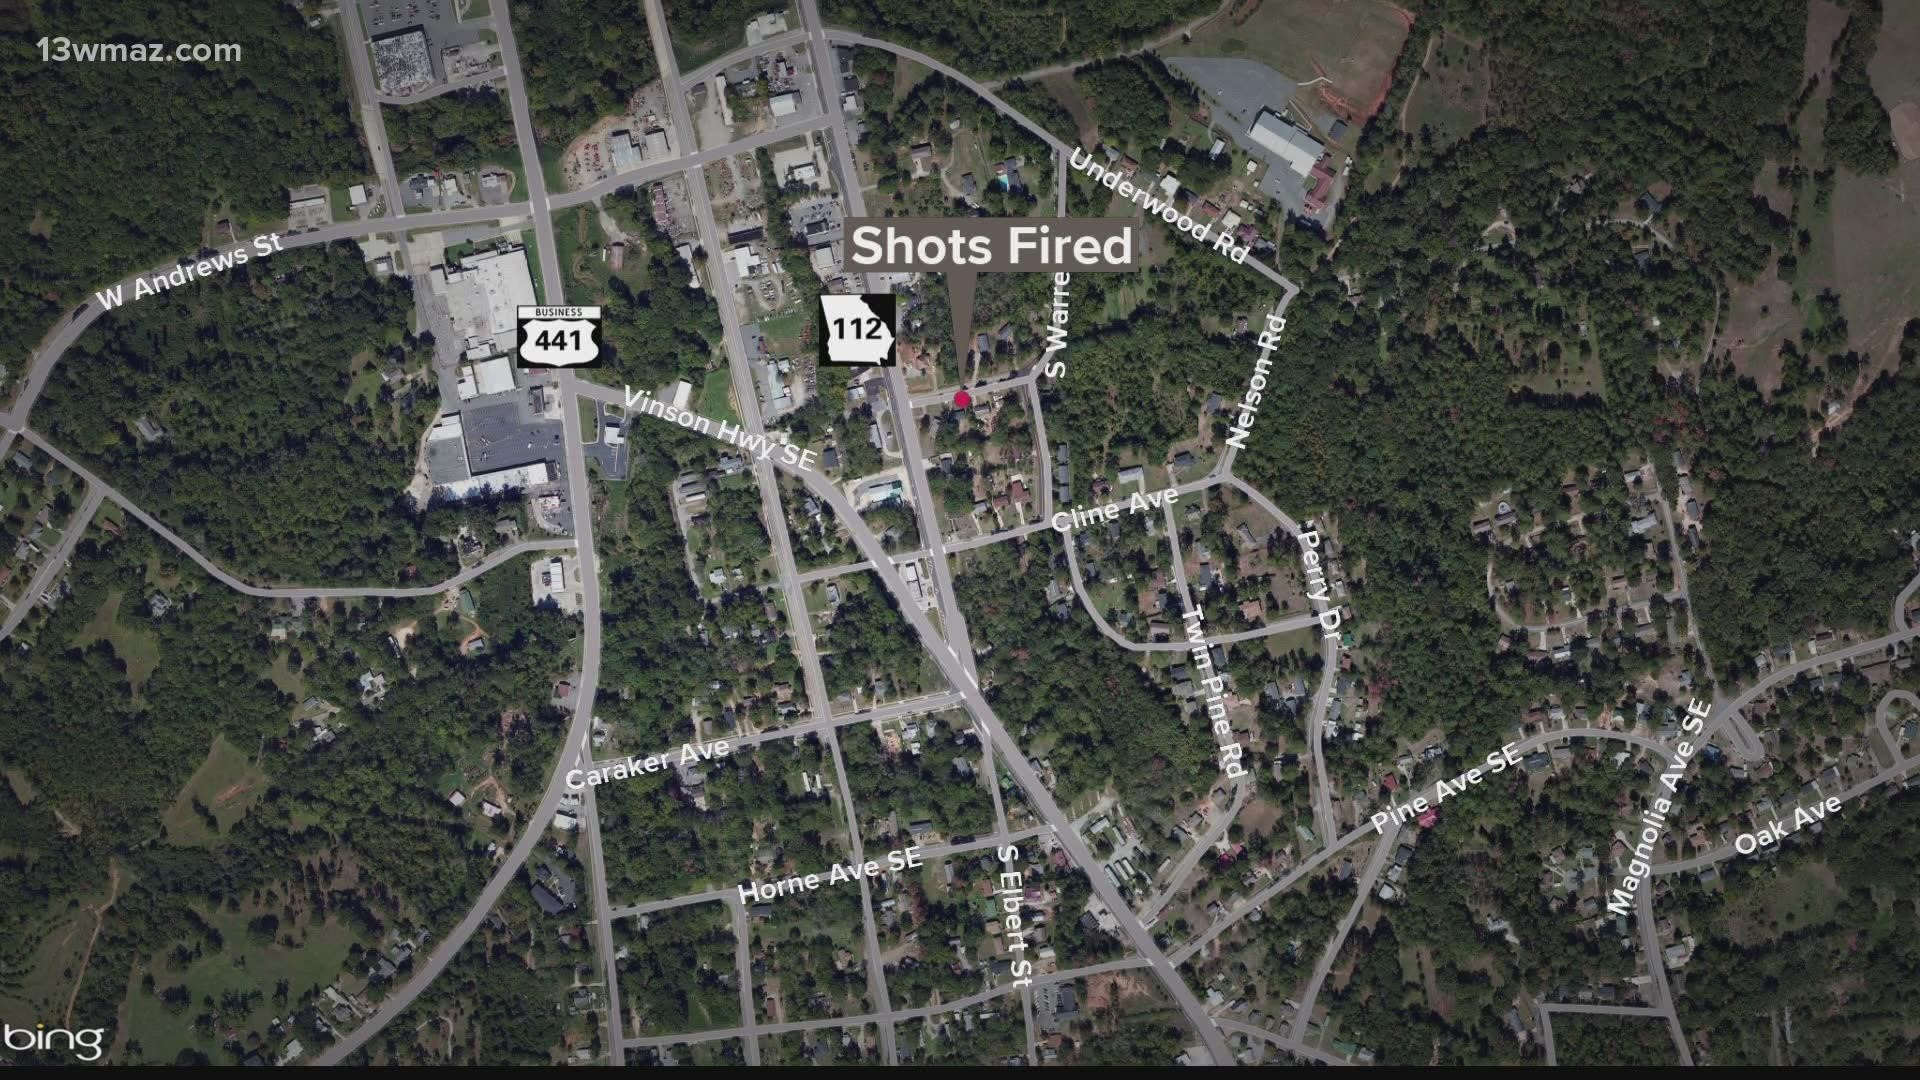 Police are investigating after shots were fired into a Milledgeville apartment building Friday night.